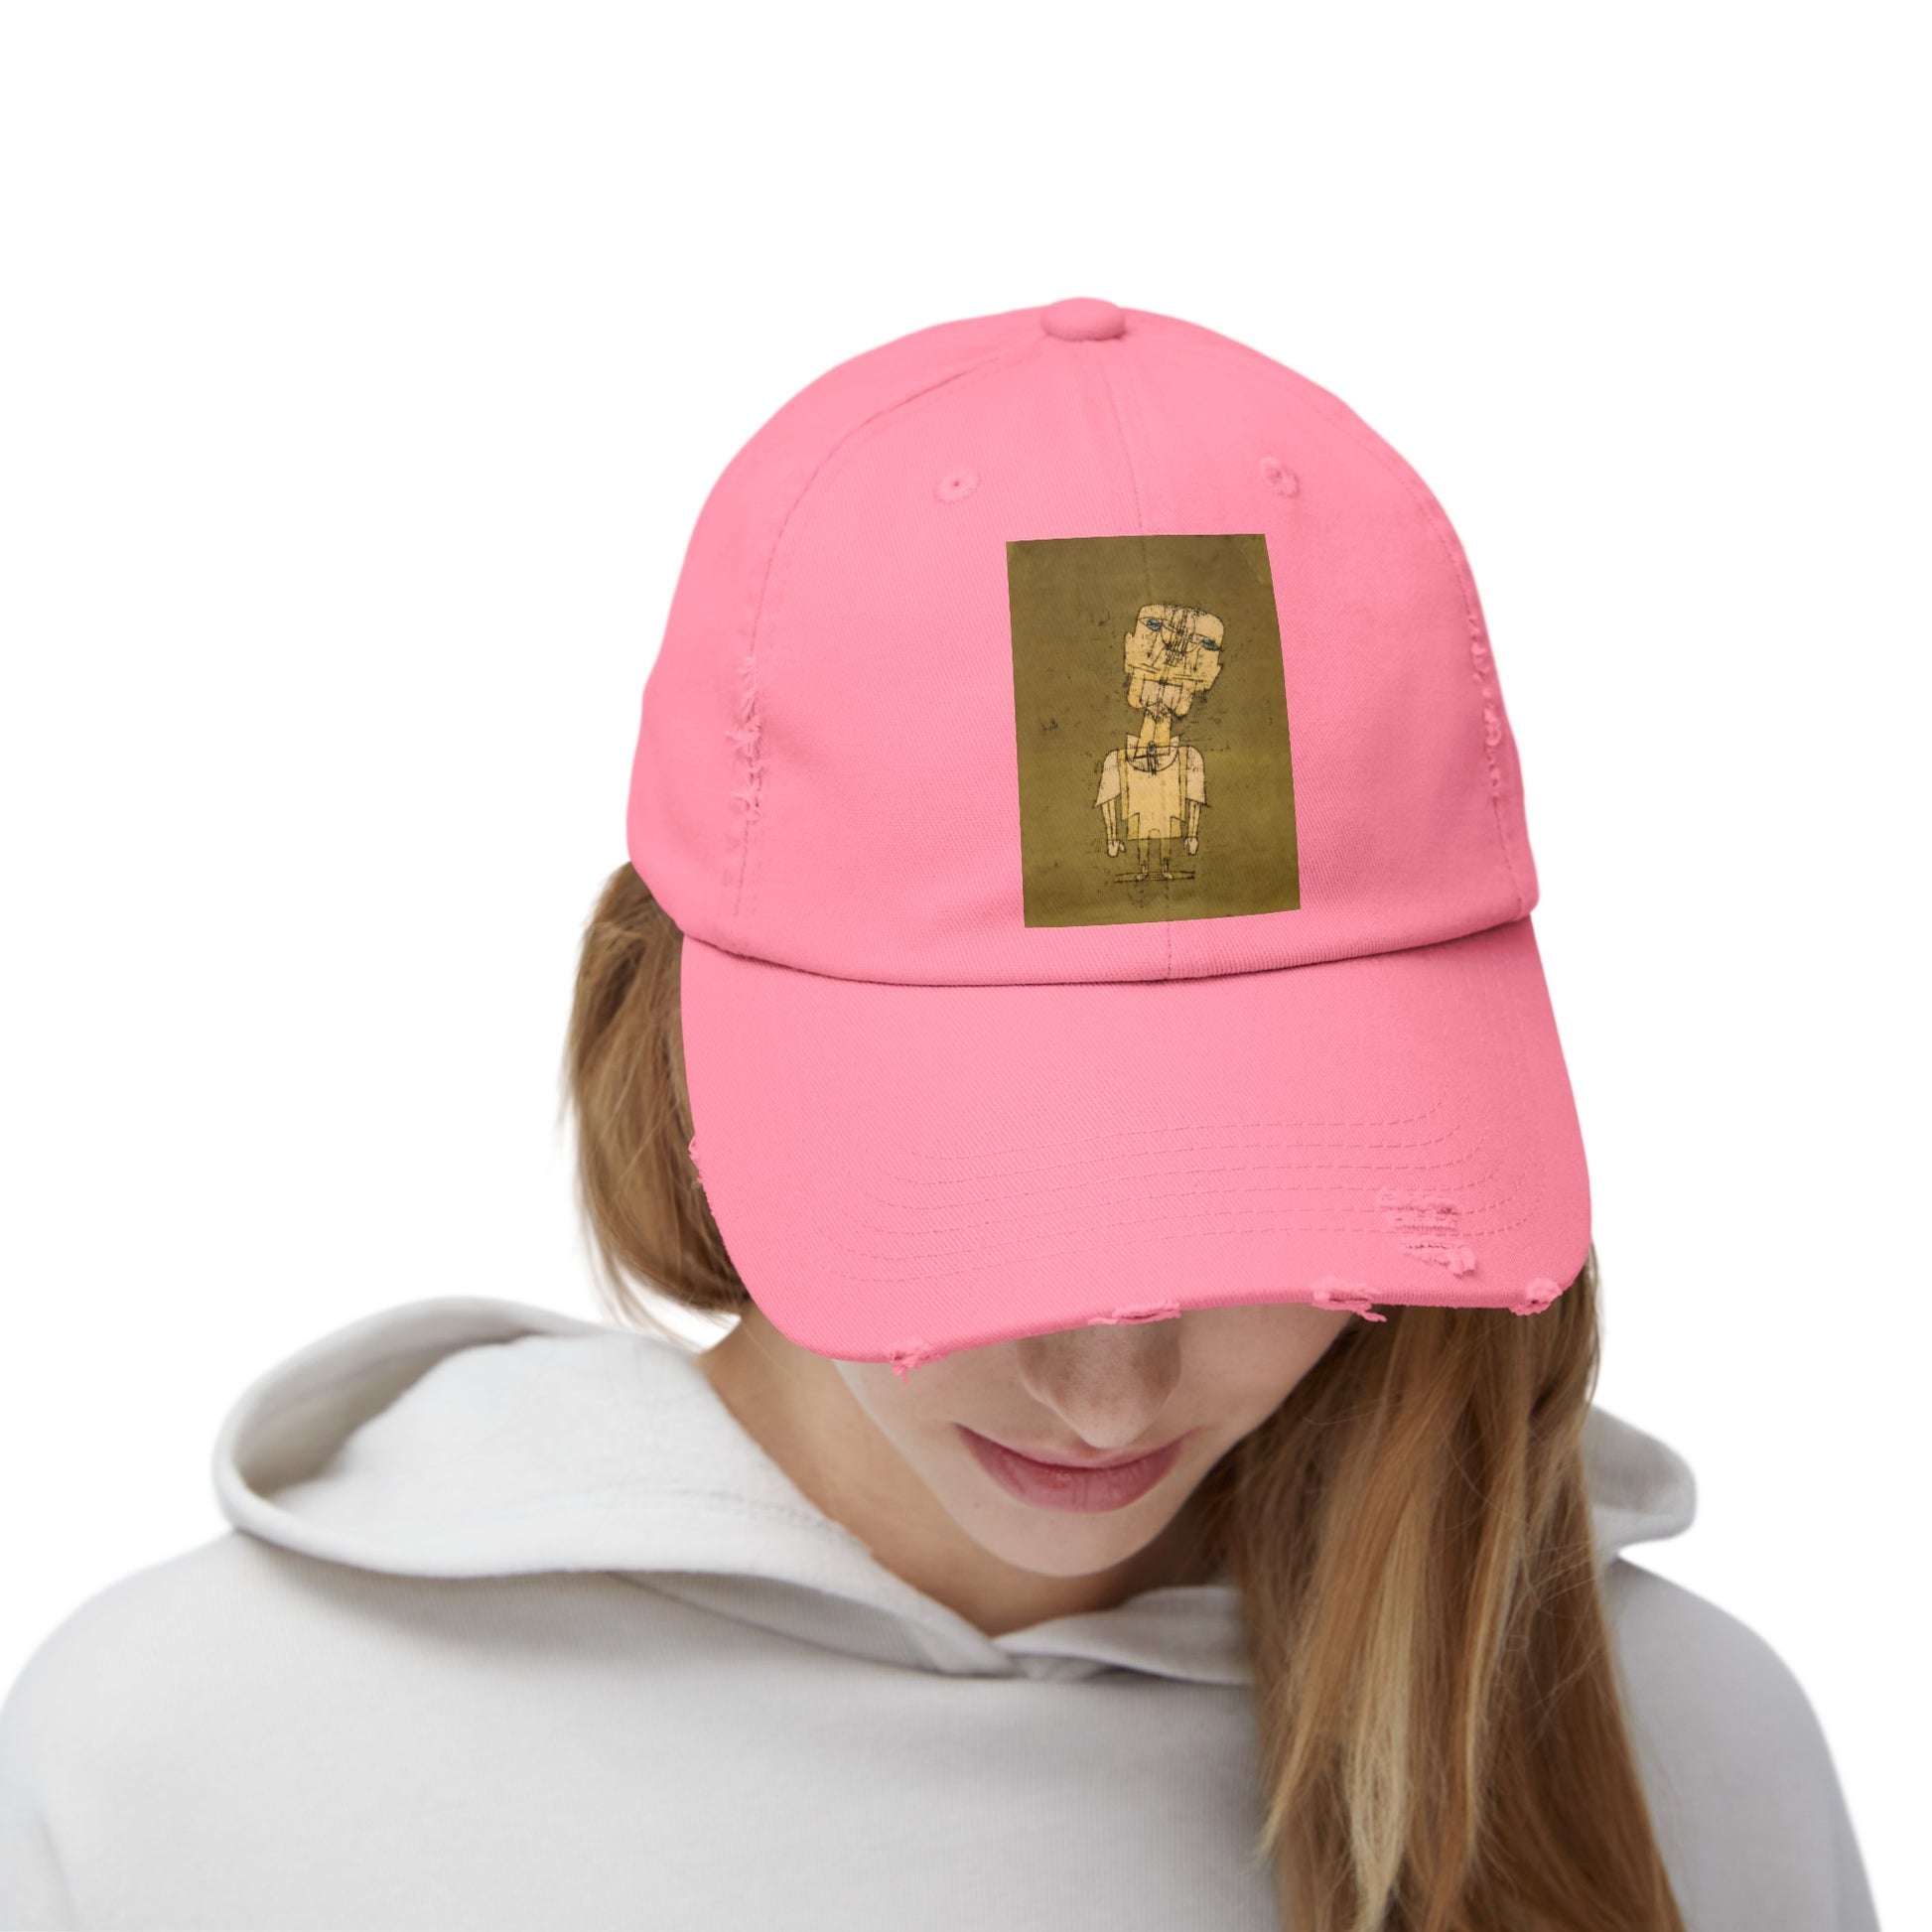 a woman wearing a pink hat with a picture of a dog on it